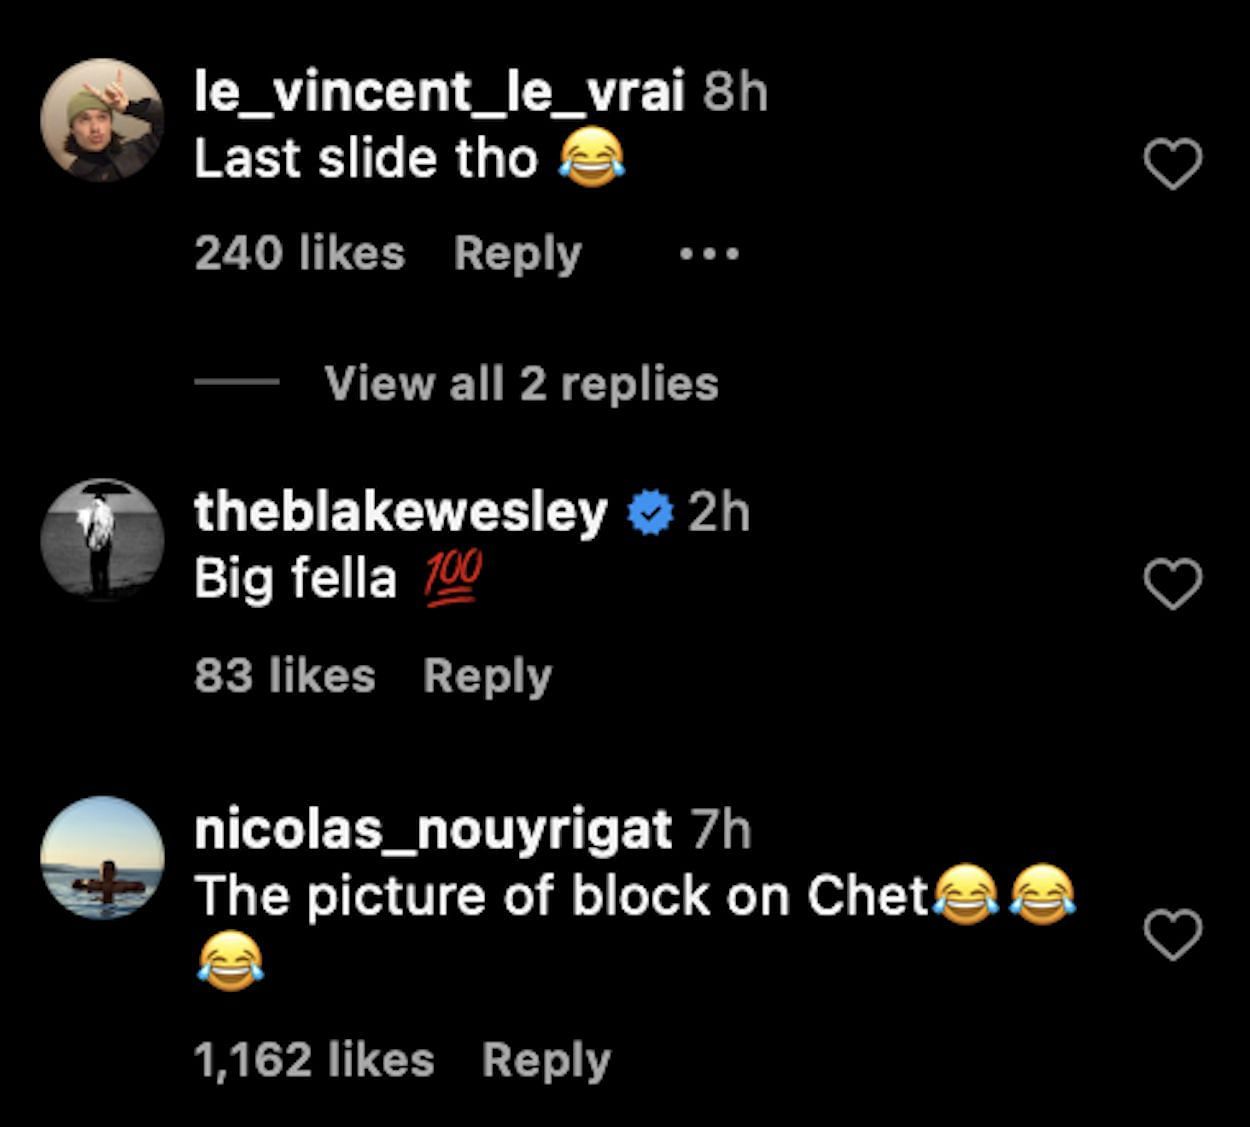 @Wemby - Instagram comments